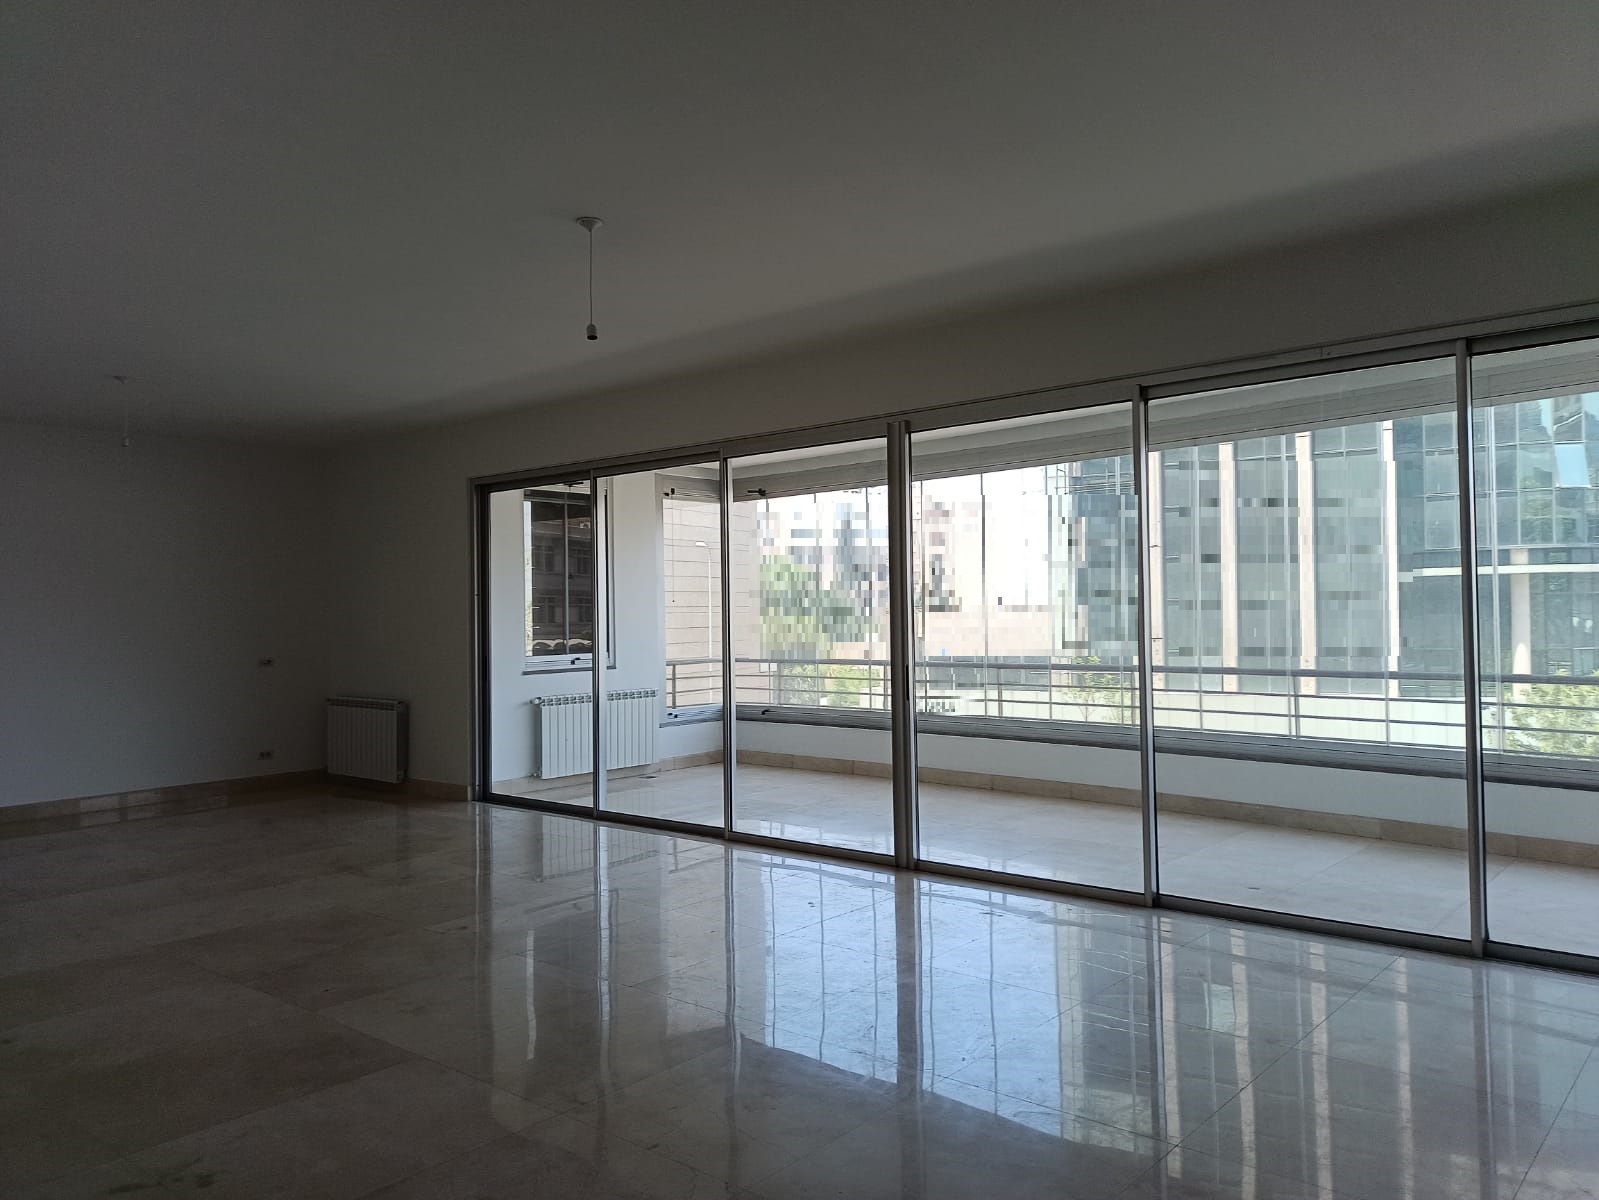 Apartment For Rent or For Sale In Achrafieh